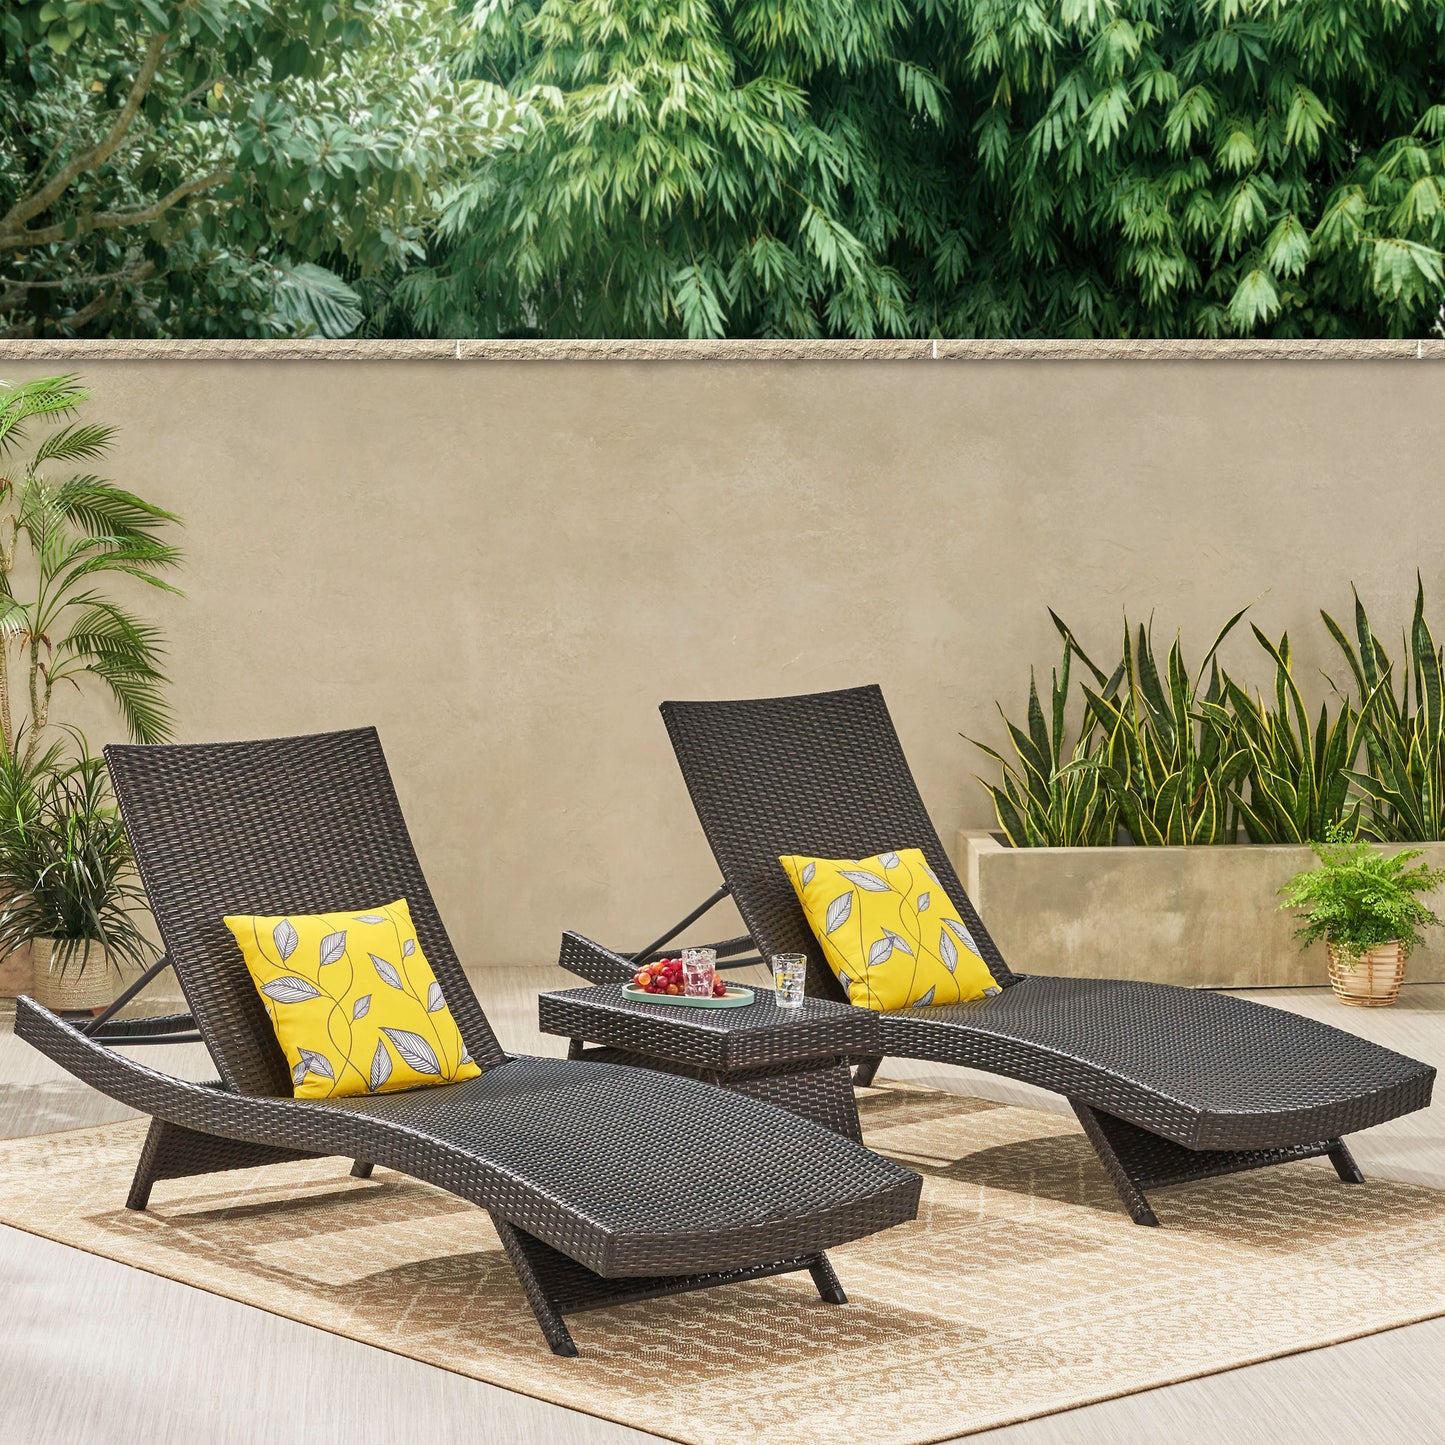 Lakeport 3pc Outdoor Wicker Chaise Lounge & Table Set